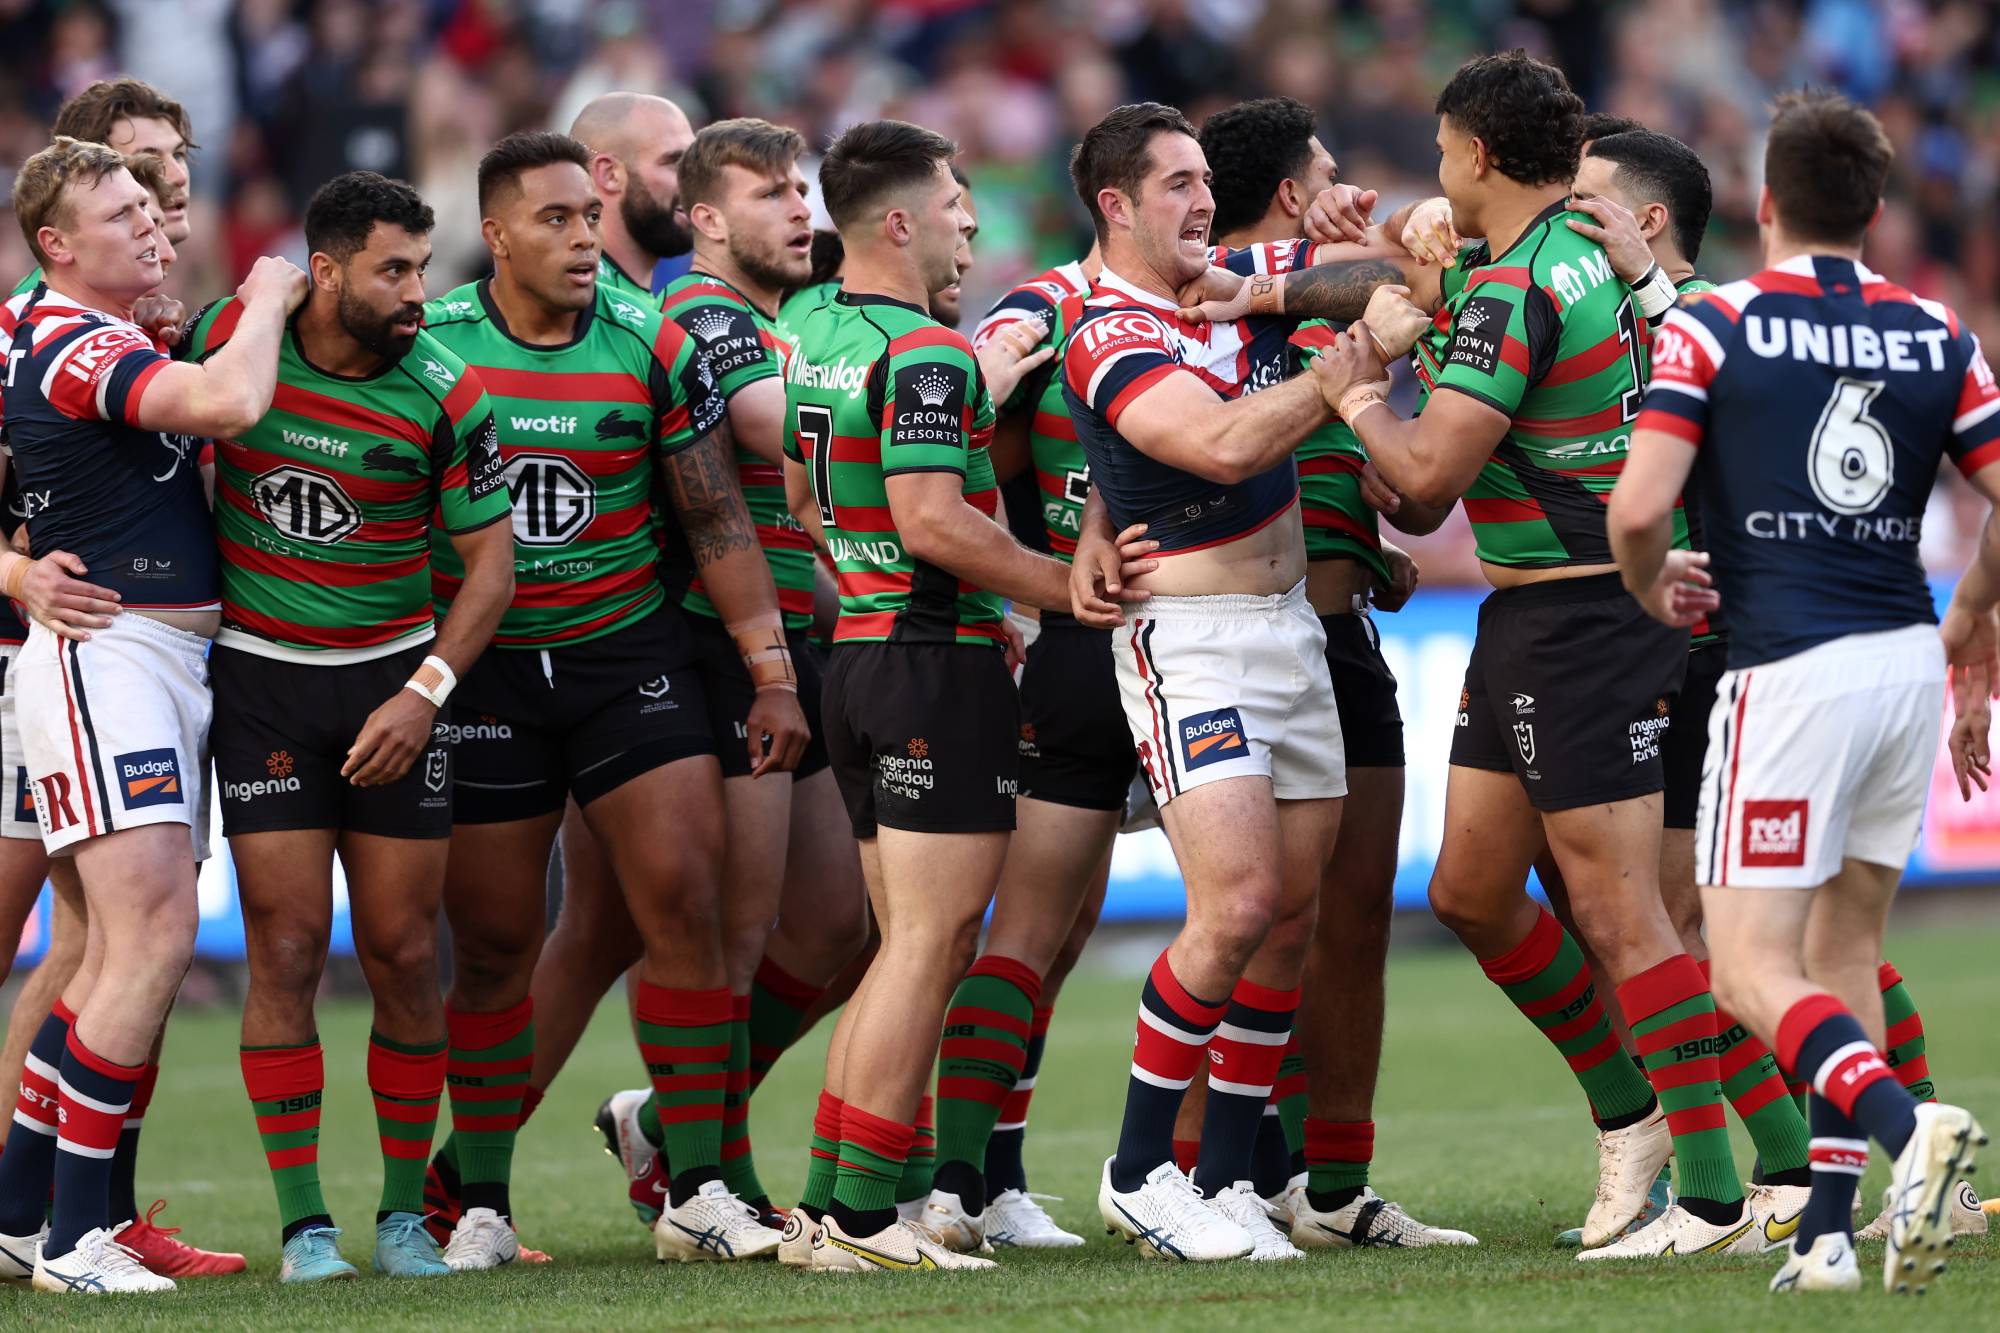 SYDNEY, AUSTRALIA - SEPTEMBER 11: Players scuffle during the NRL Elimination Final match between the Sydney Roosters and the South Sydney Rabbitohs at Allianz Stadium on September 11, 2022 in Sydney, Australia. (Photo by Matt King/Getty Images)